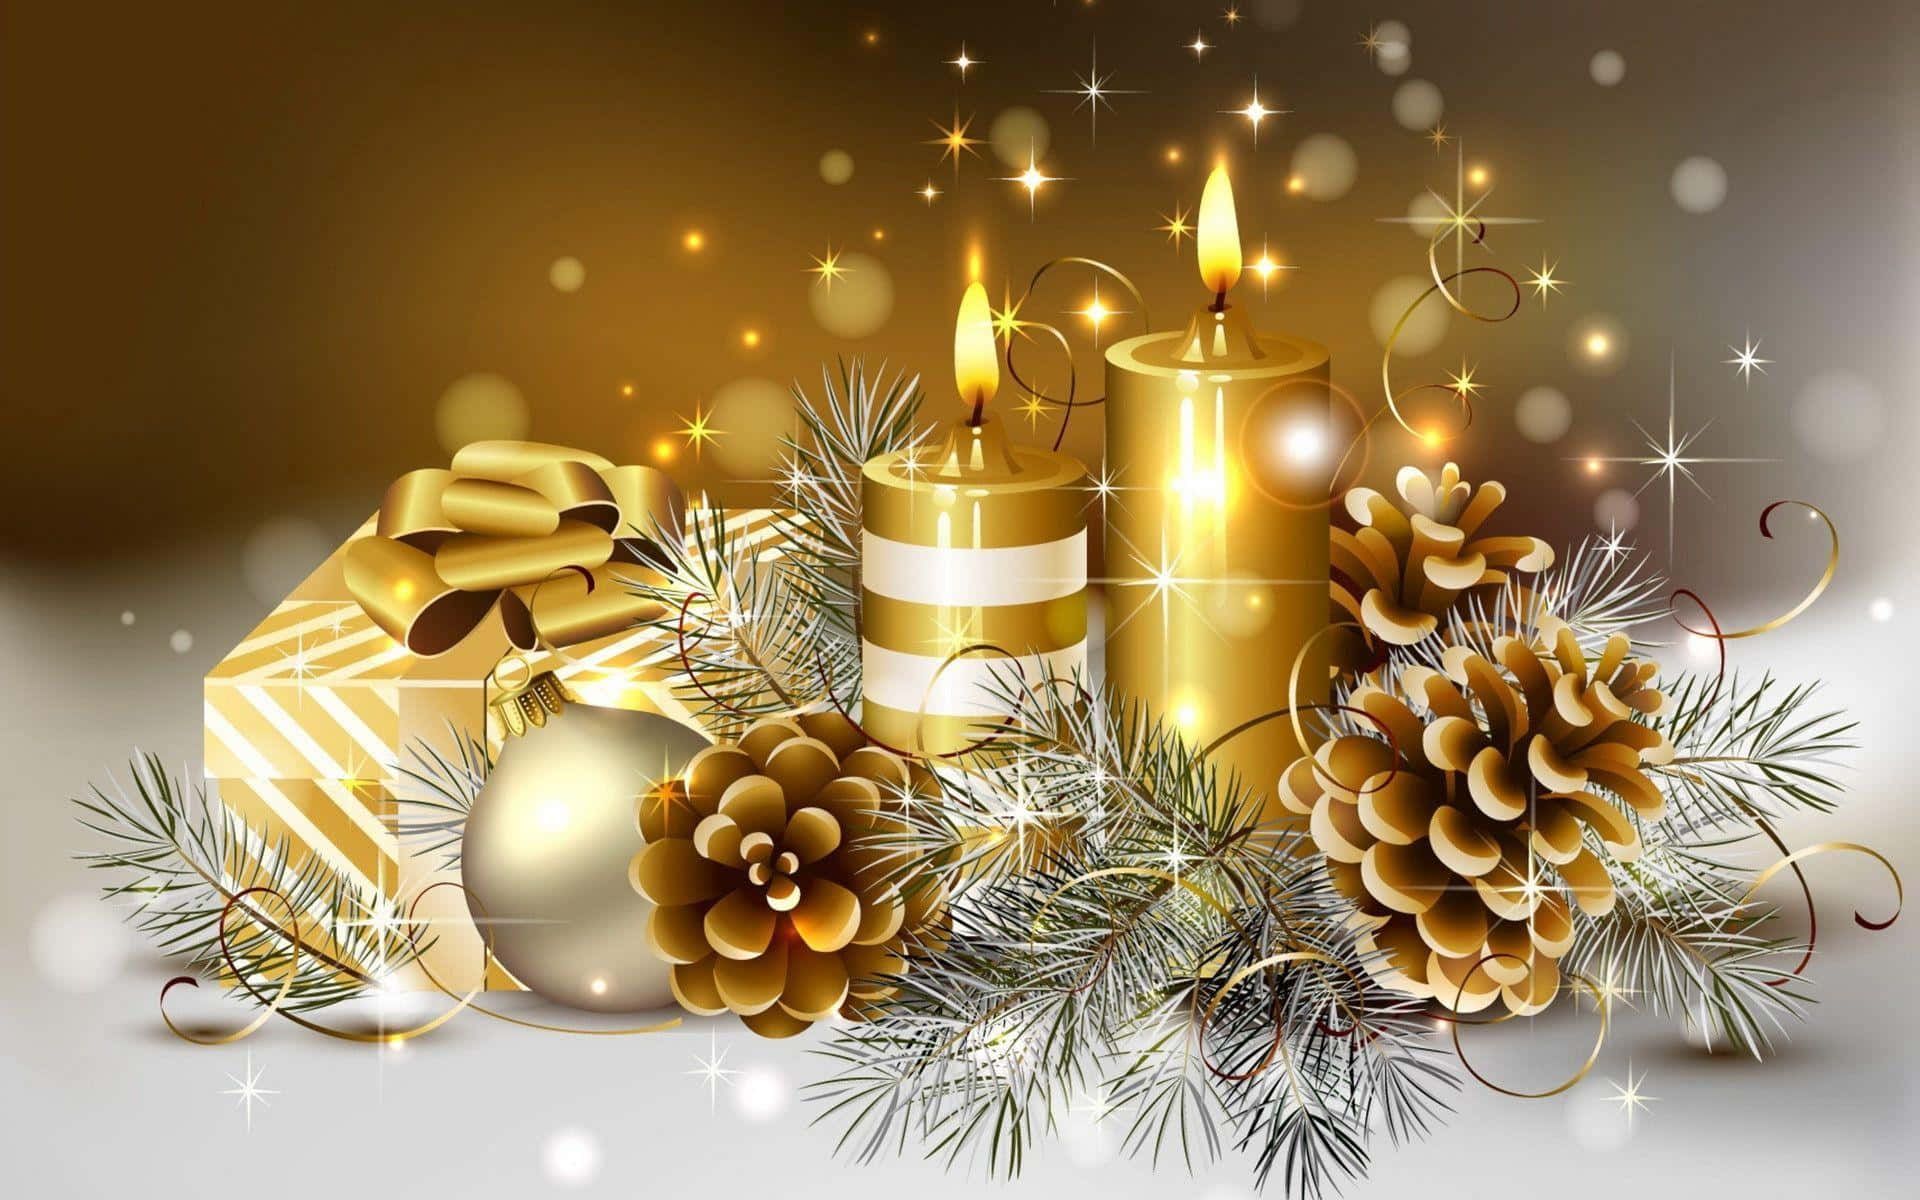 Free Golden Christmas Candles Picture